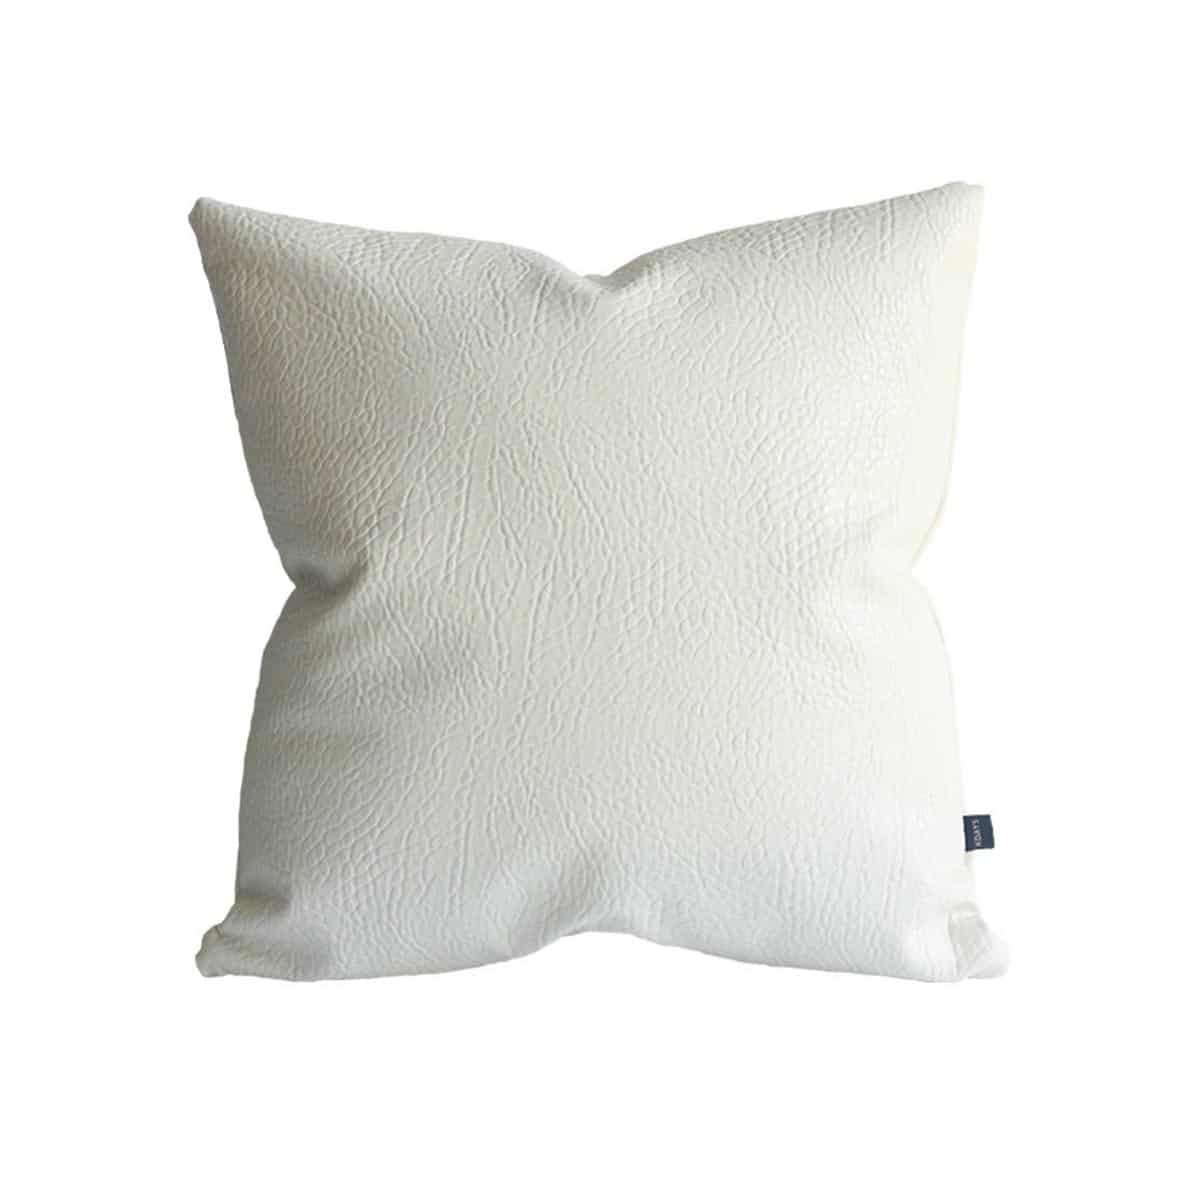 Cushion Covers Genuine Strap, White Leather Pillow